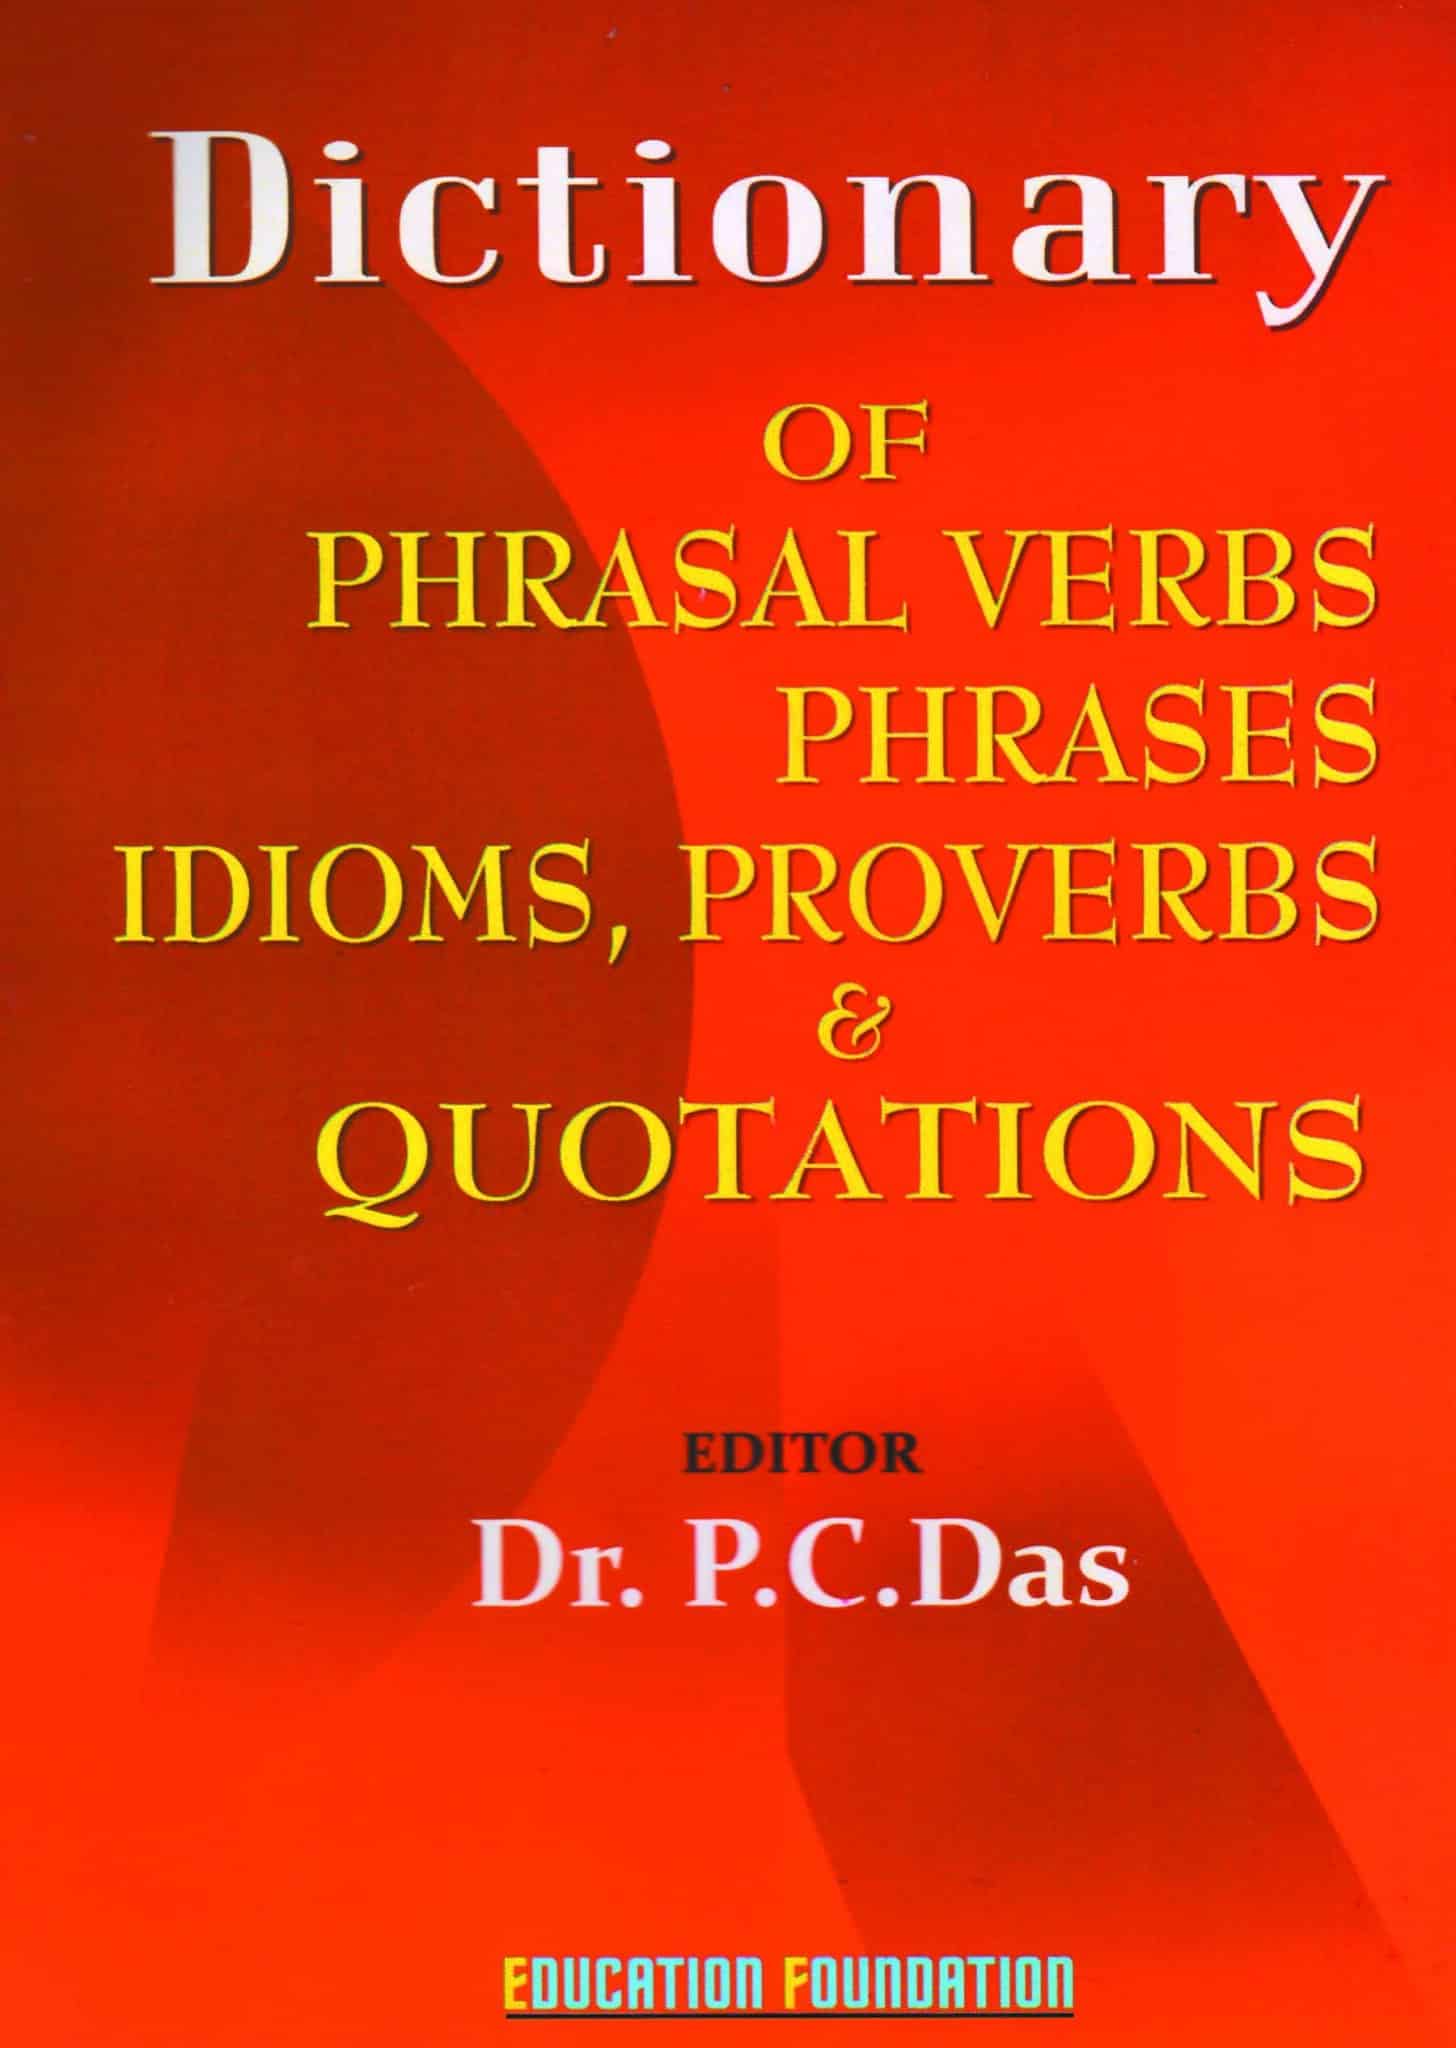 dictionary-of-phrasal-verbs-phrases-idioms-proverbs-quotations